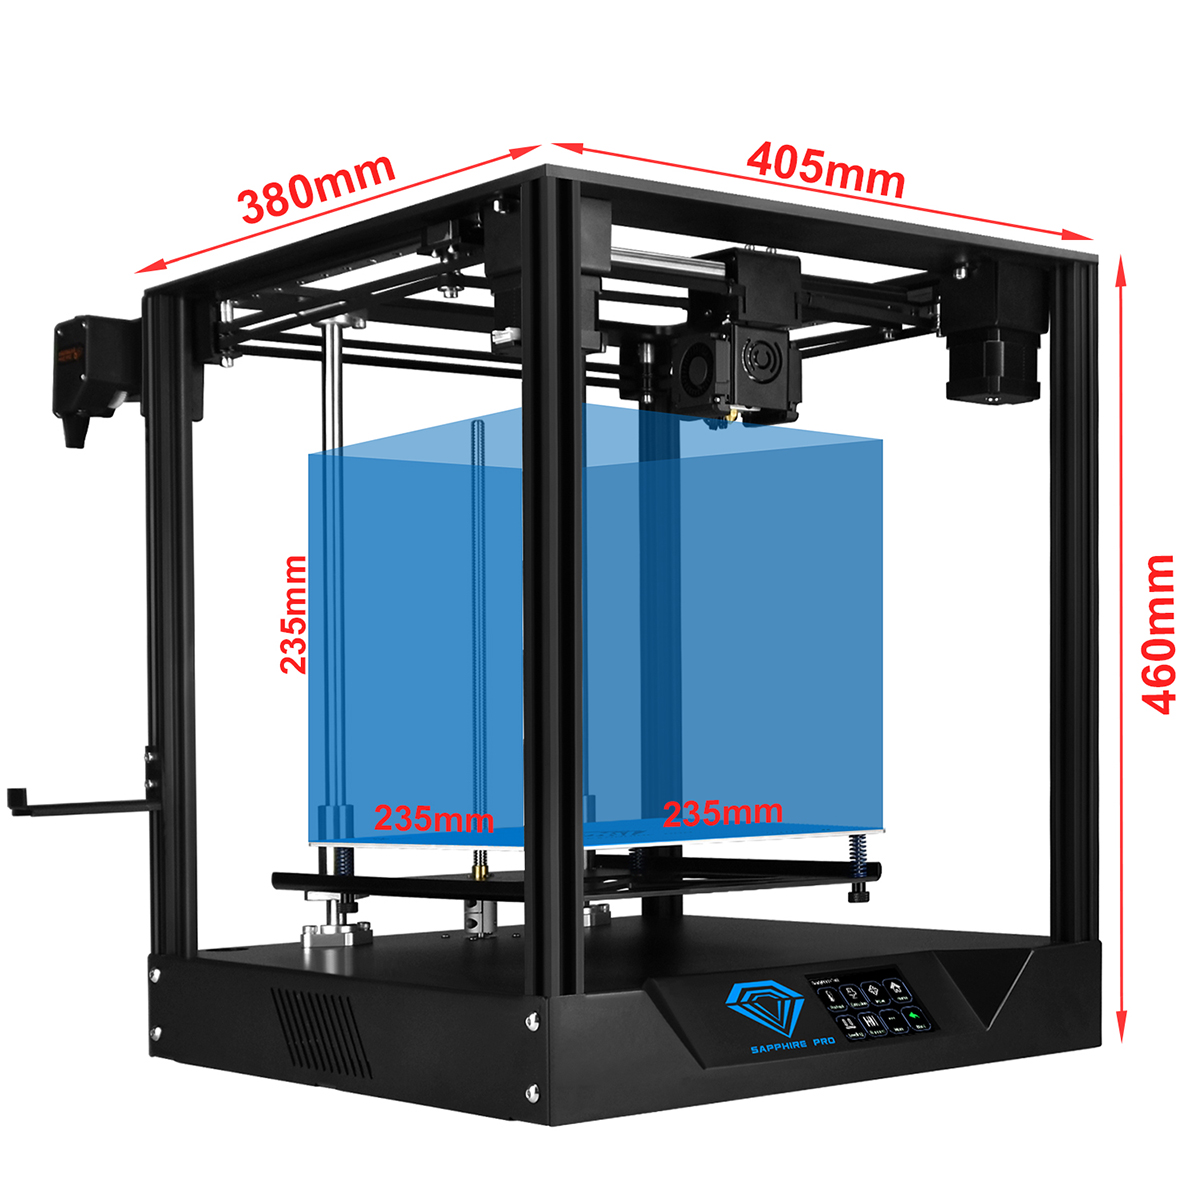 TWO TREES® Sapphire Pro CoreXY DIY 3D Printer Kit 235*235*235mm Printing Size With Dual Drive BMG Extruder / X-axis&Y-axis Linear Guide / Power Re 12